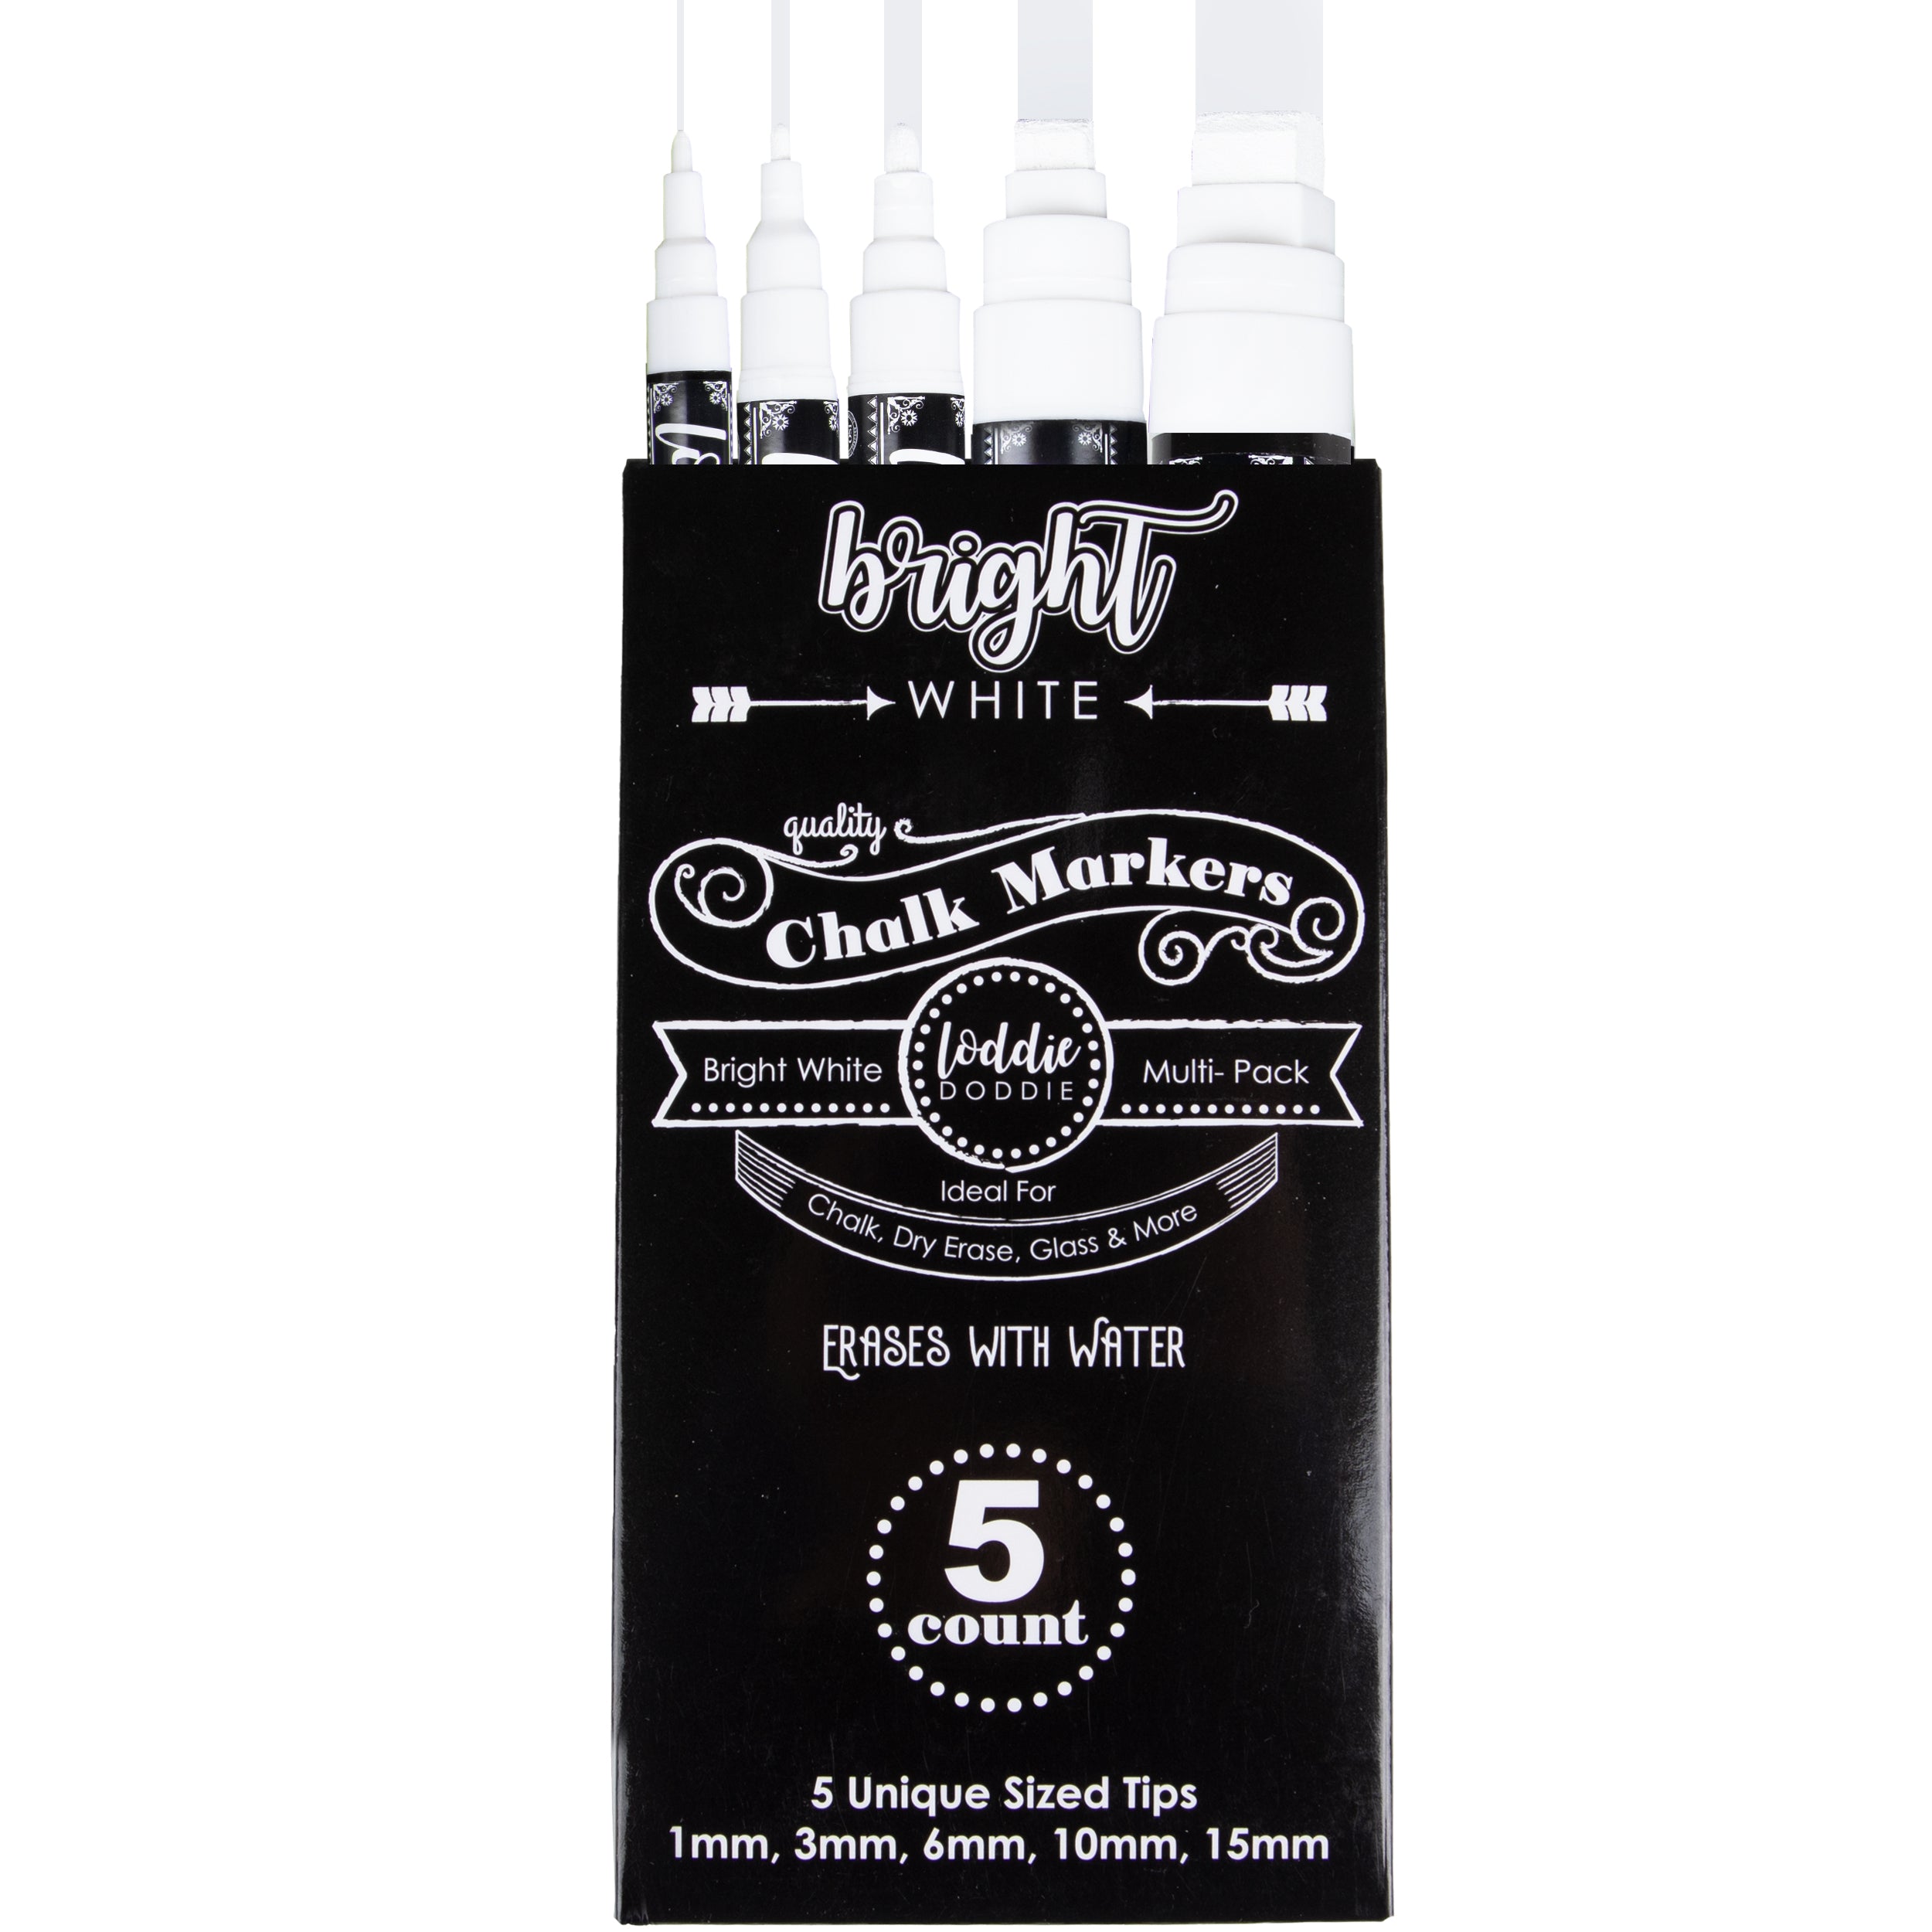 2- Liquid Chalk Markers for Chalkboard, White, Pack of 5, 6mm Reversible  Tip